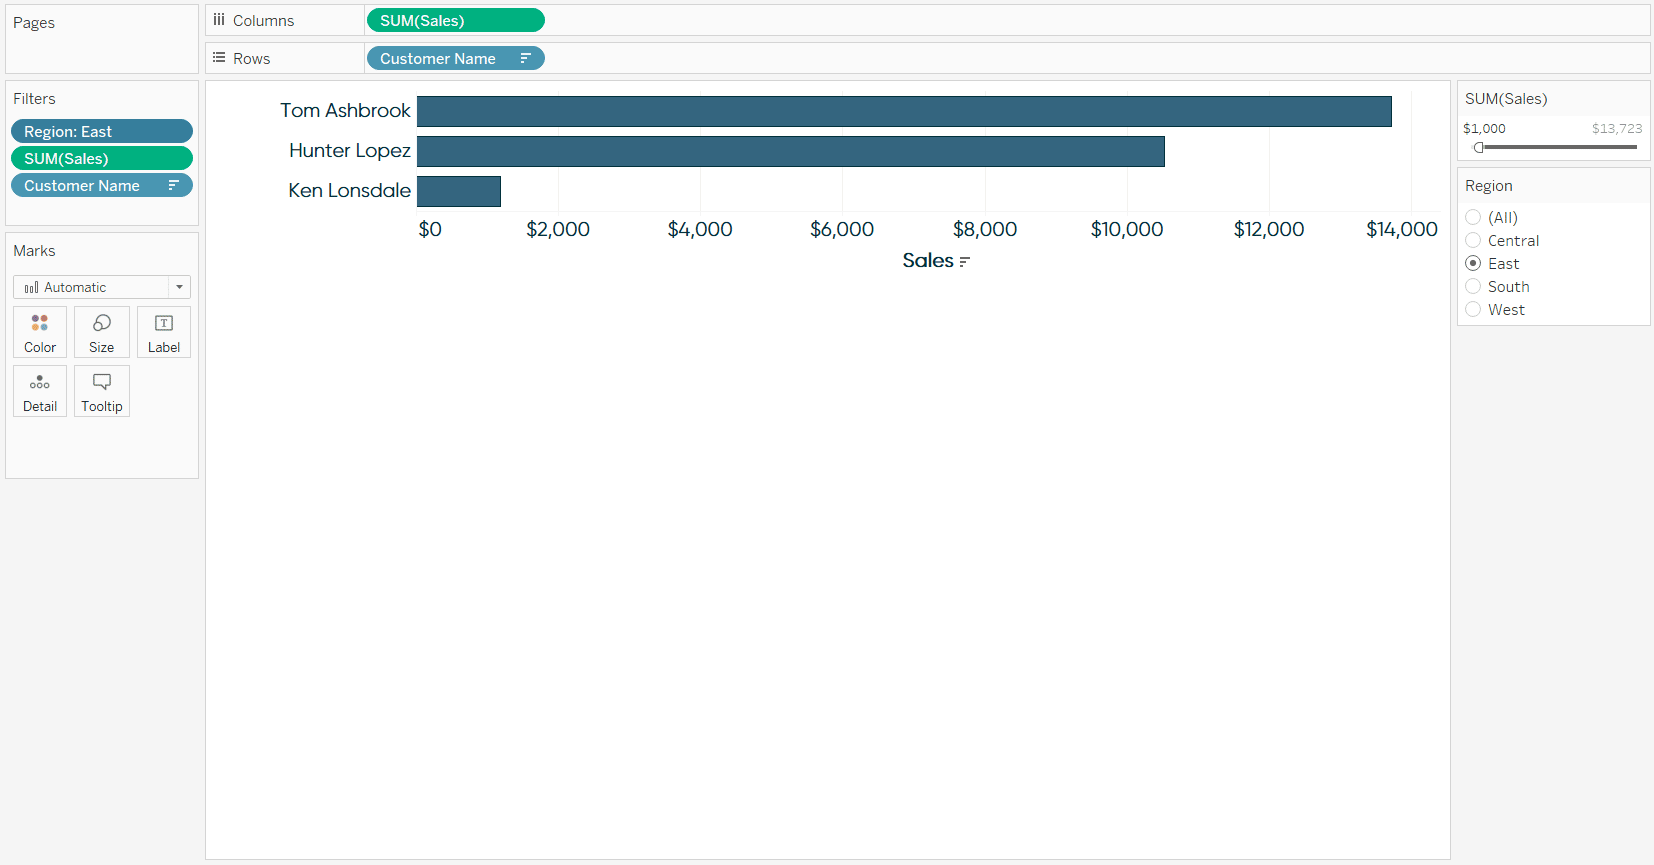 Tableau Sorted Bar Chart Showing Sales by Customer with Top 3 Filter